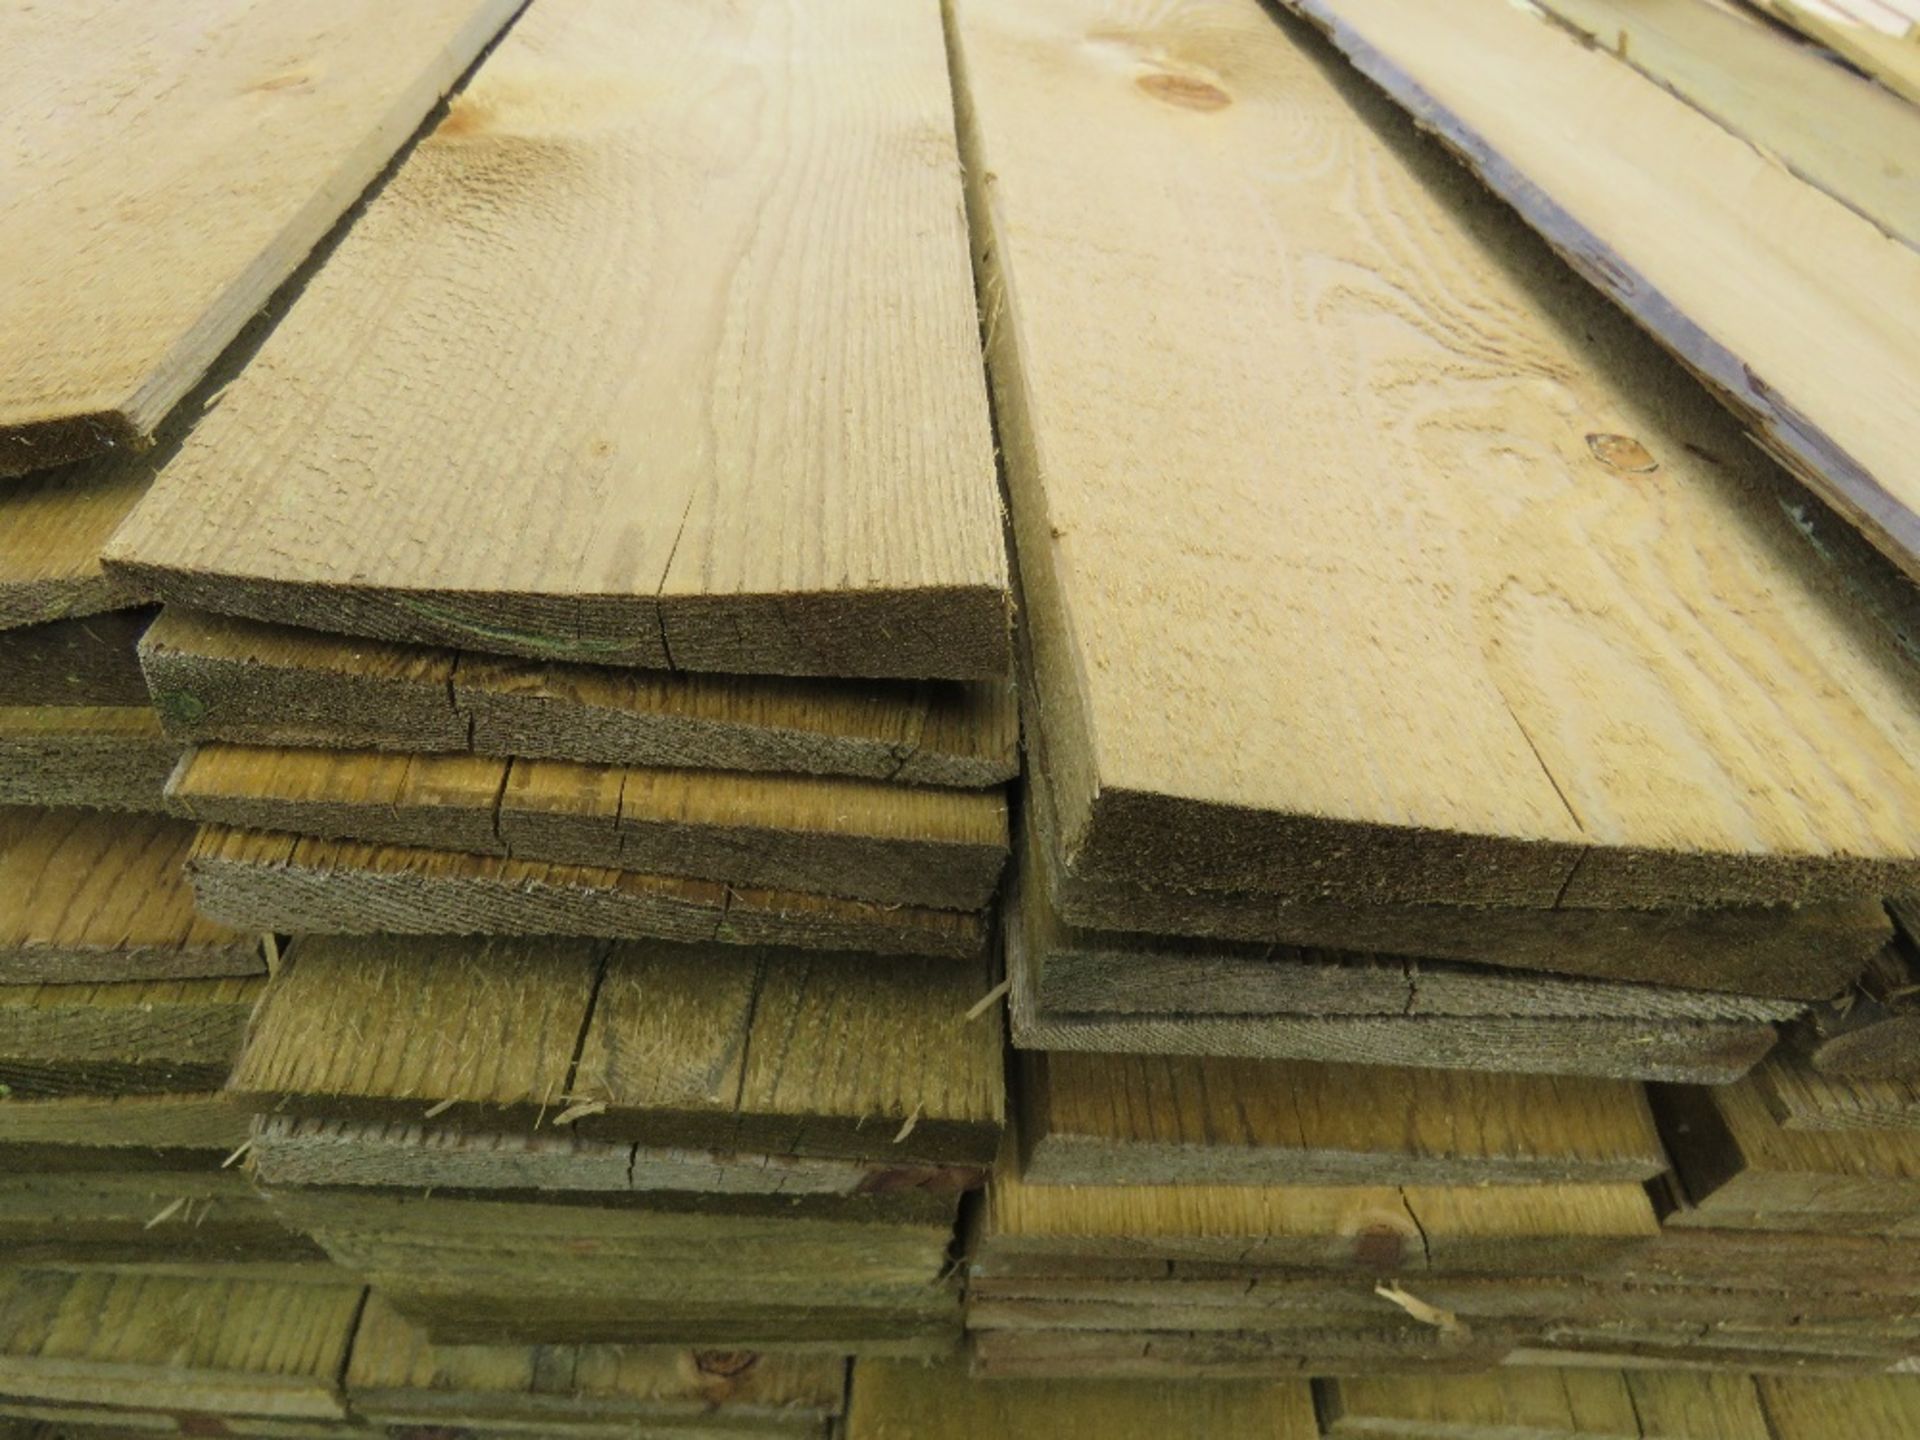 PACK OF FEATHER EDGE FENCE CLADDING TIMBER BOARDS, 0.89M LENGTH X 10CM WIDTH APPROX. - Image 3 of 3